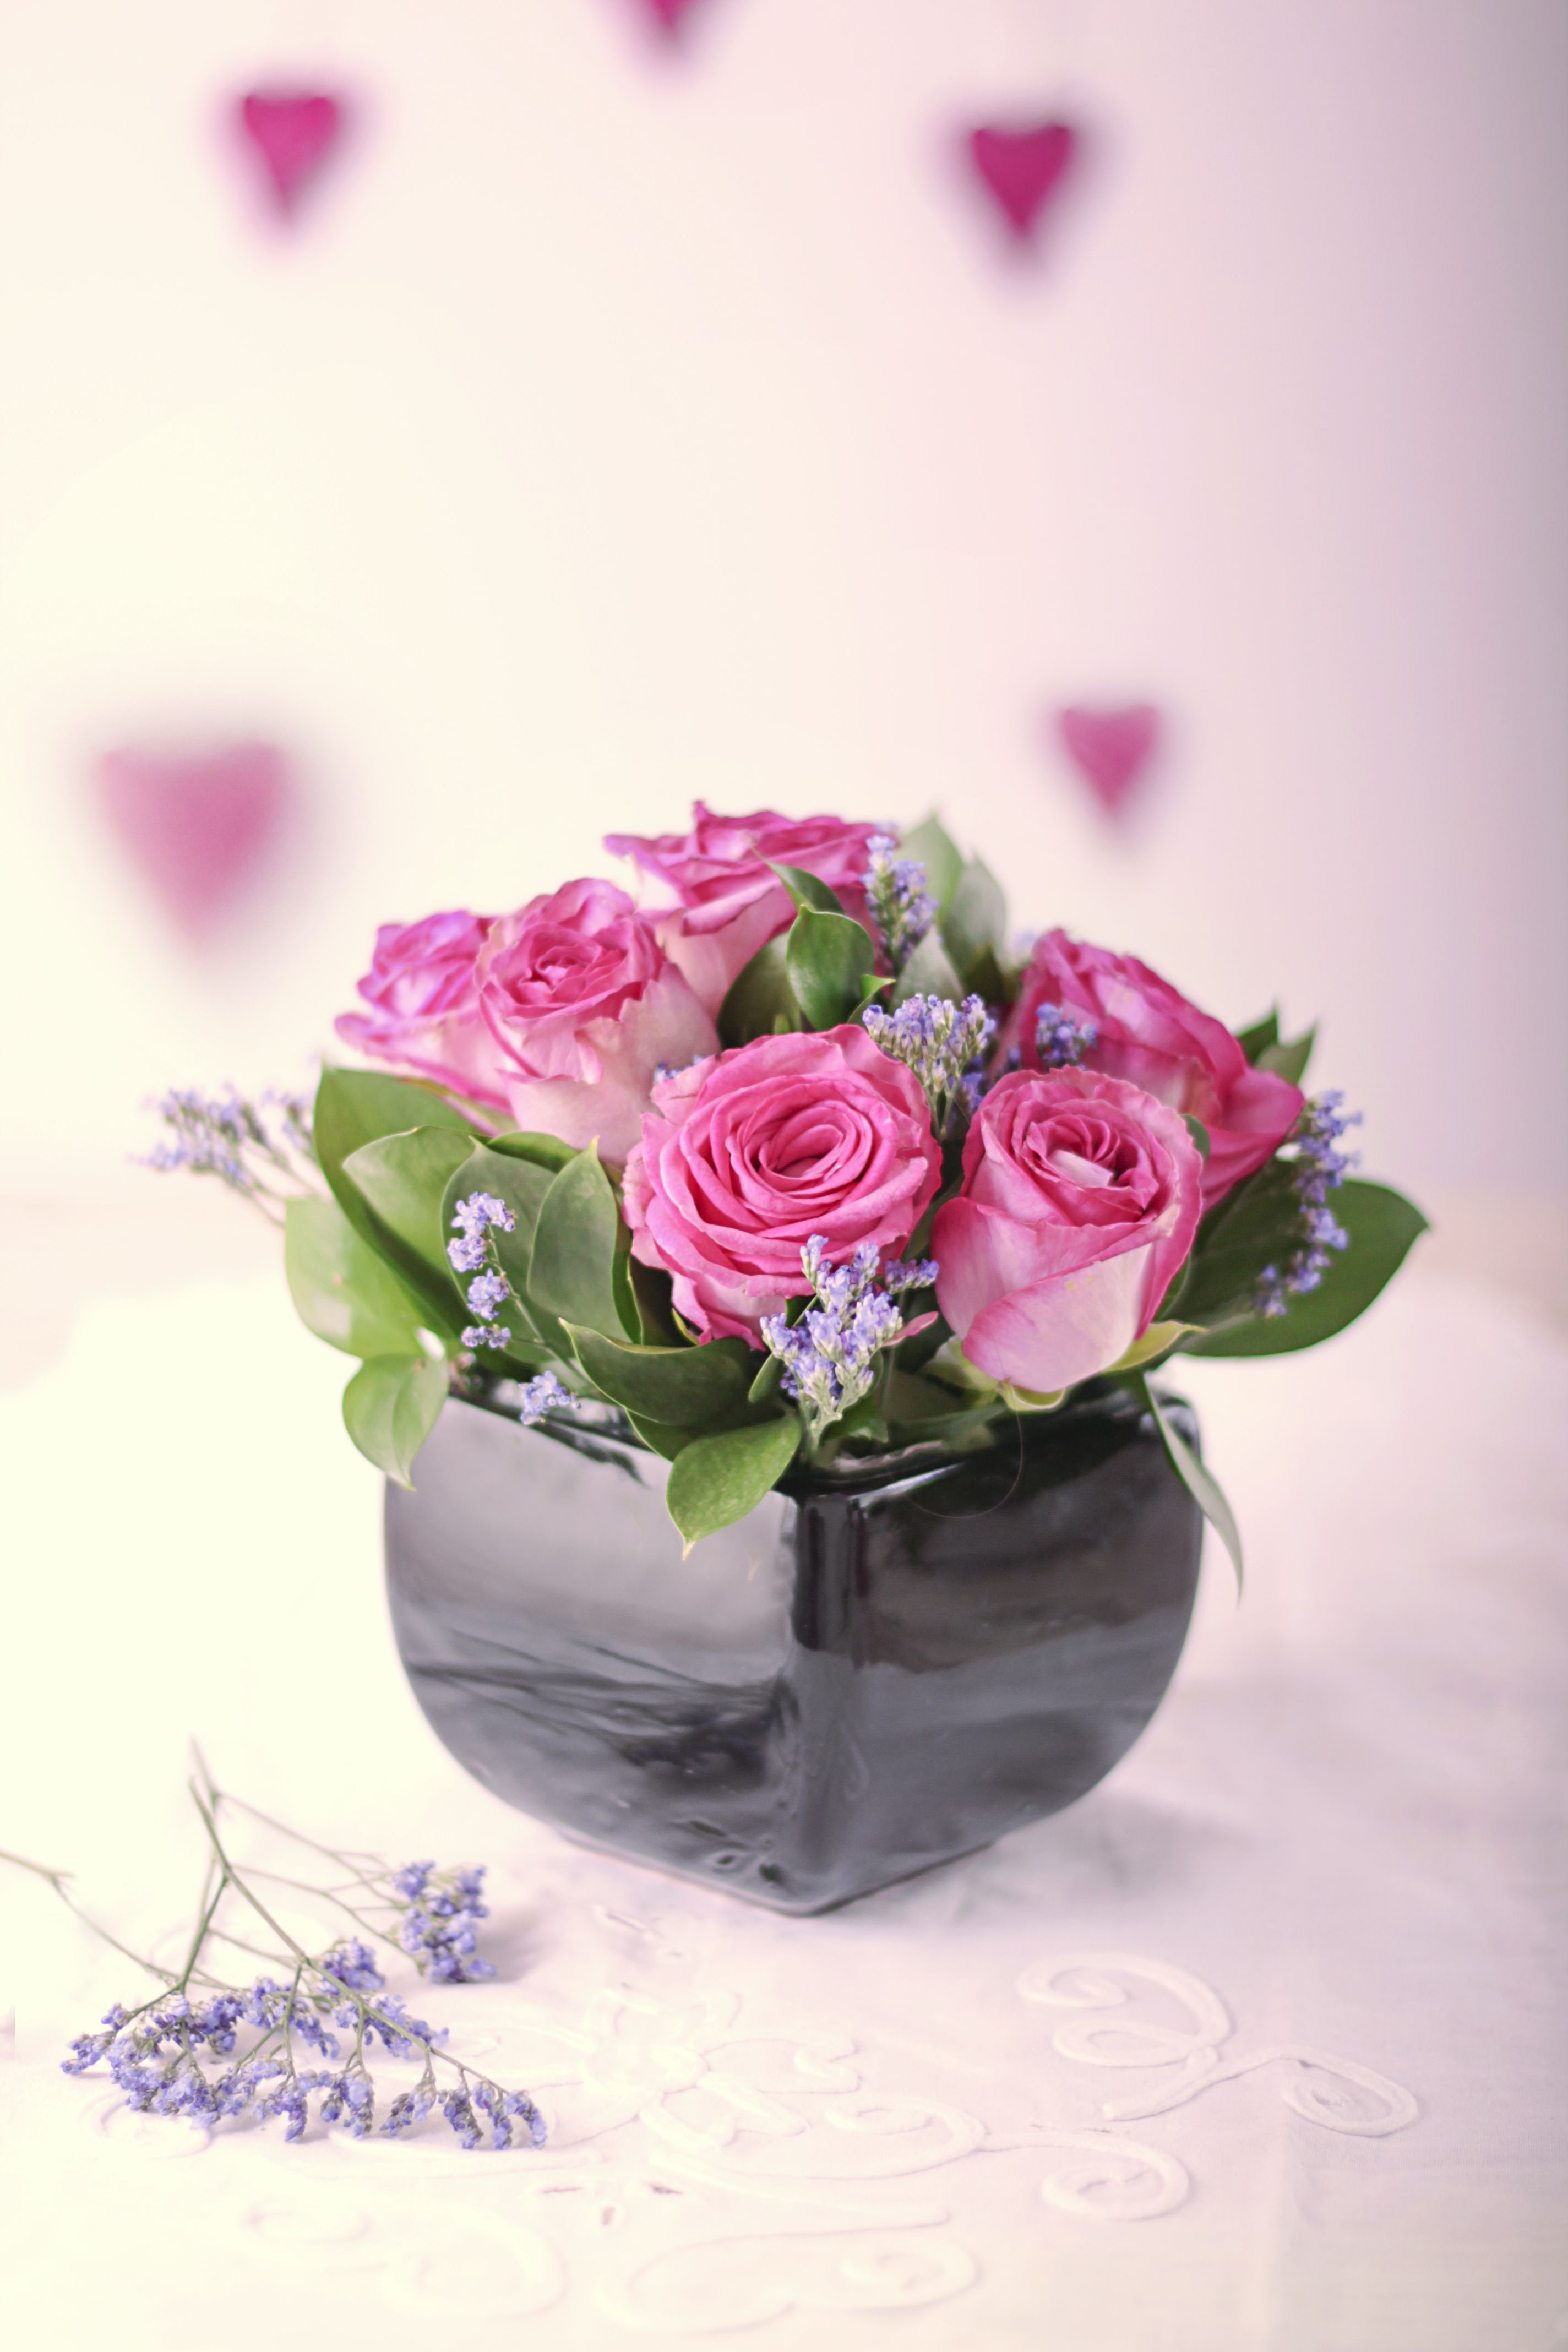 19 Elegant Flower Arrangements In Small Square Vases 2024 free download flower arrangements in small square vases of petite pink roses in a small glass vase in house mood shoots with regard to petite pink roses in a small glass vase